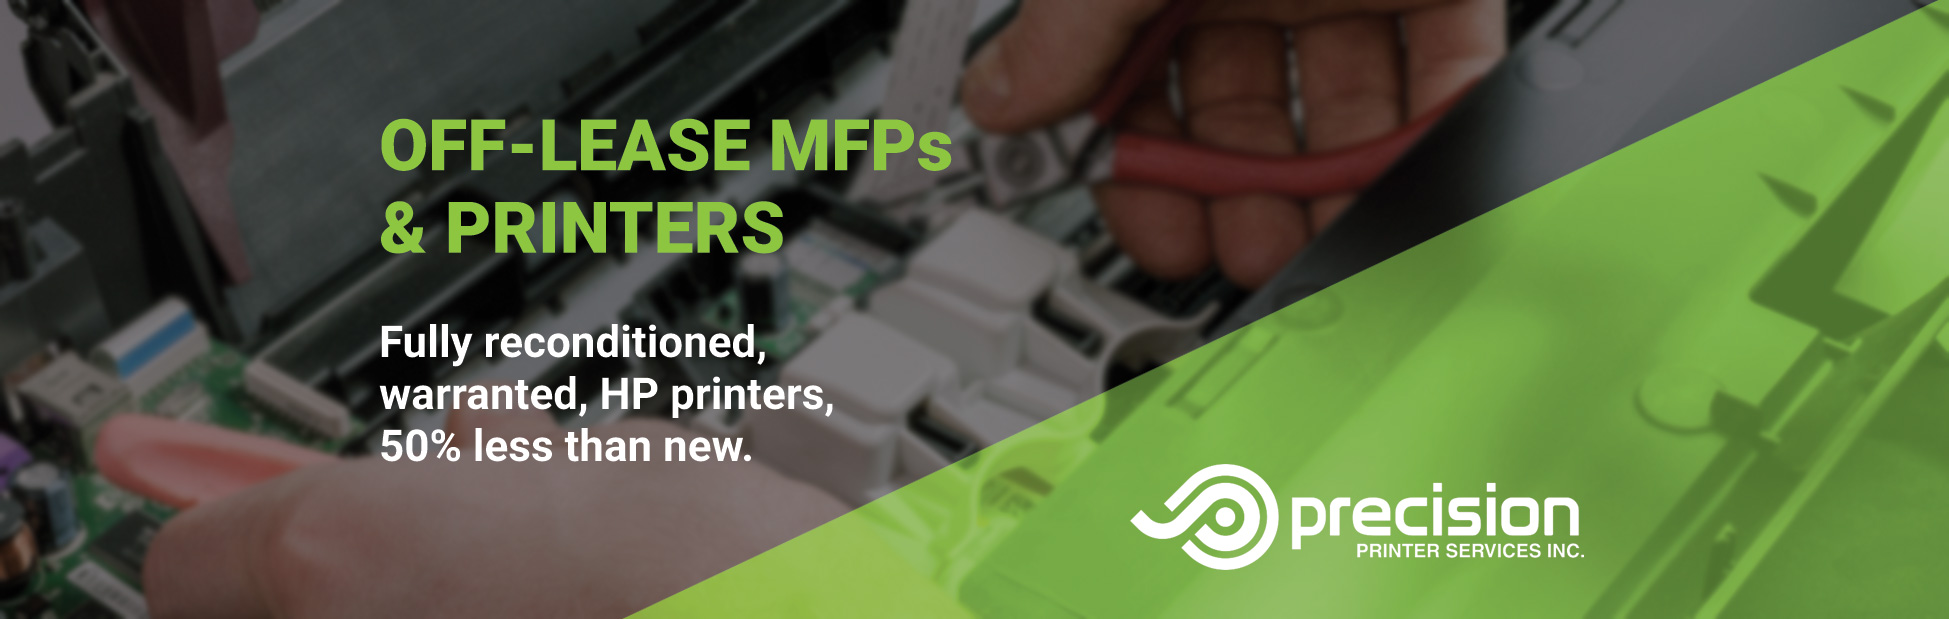 Off-Lease MFPs & Printers